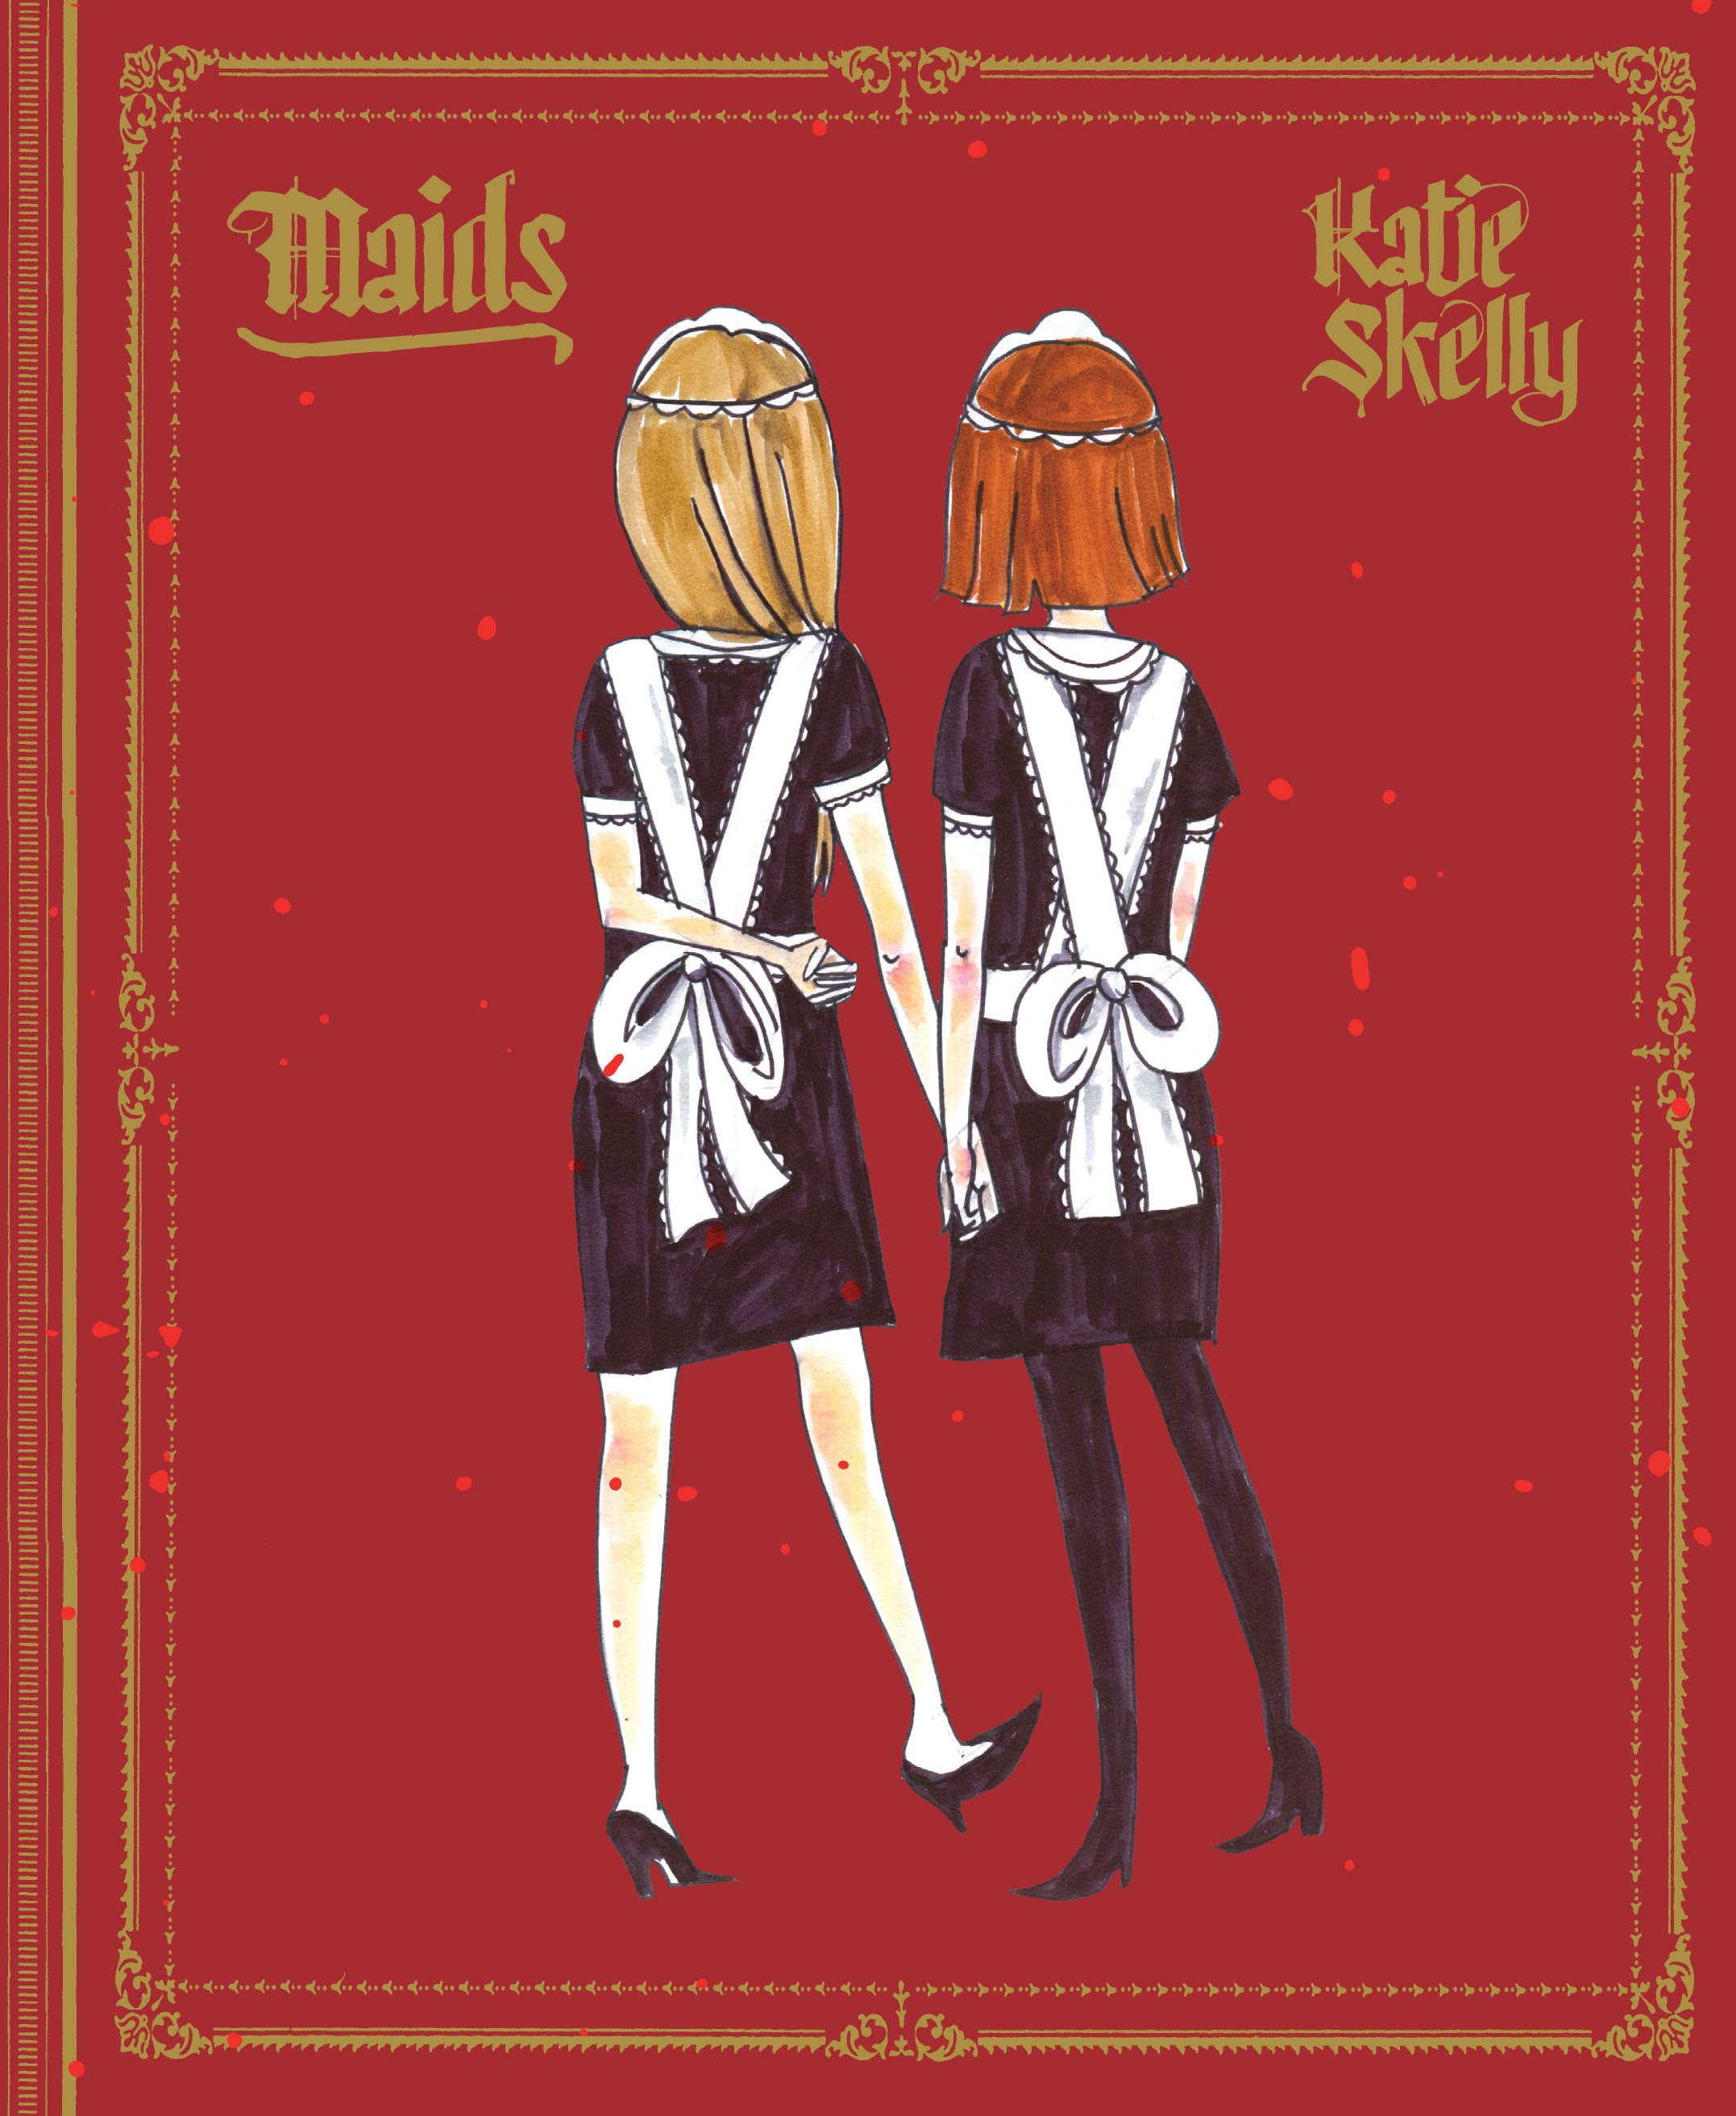 Read online Maids comic -  Issue # TPB - 1